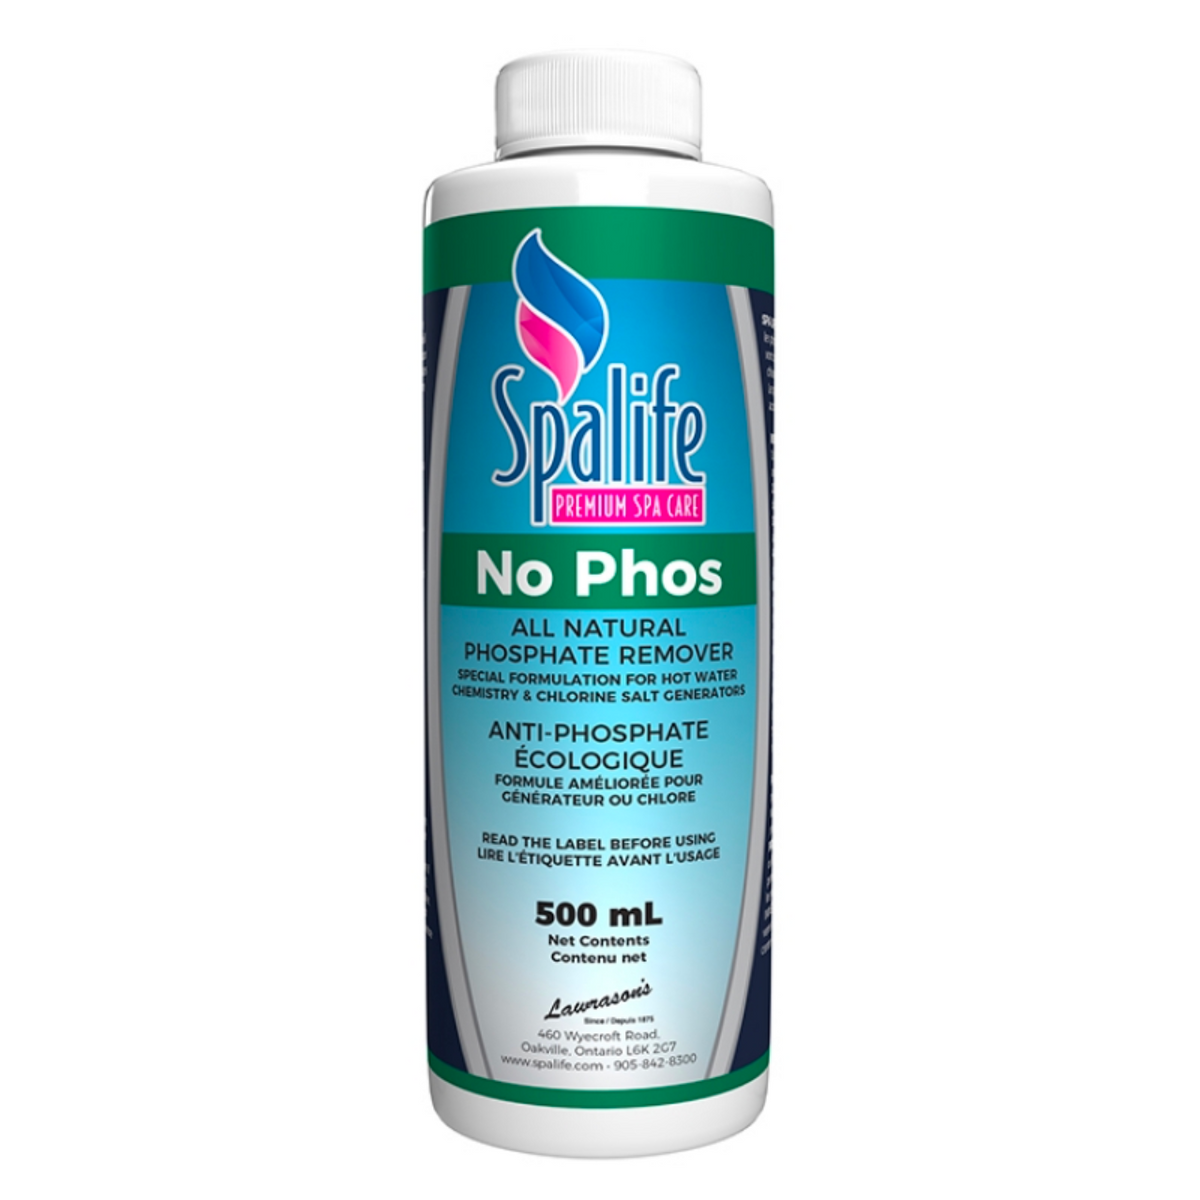 Spa Life No Phos - All Natural Phosphate Remover